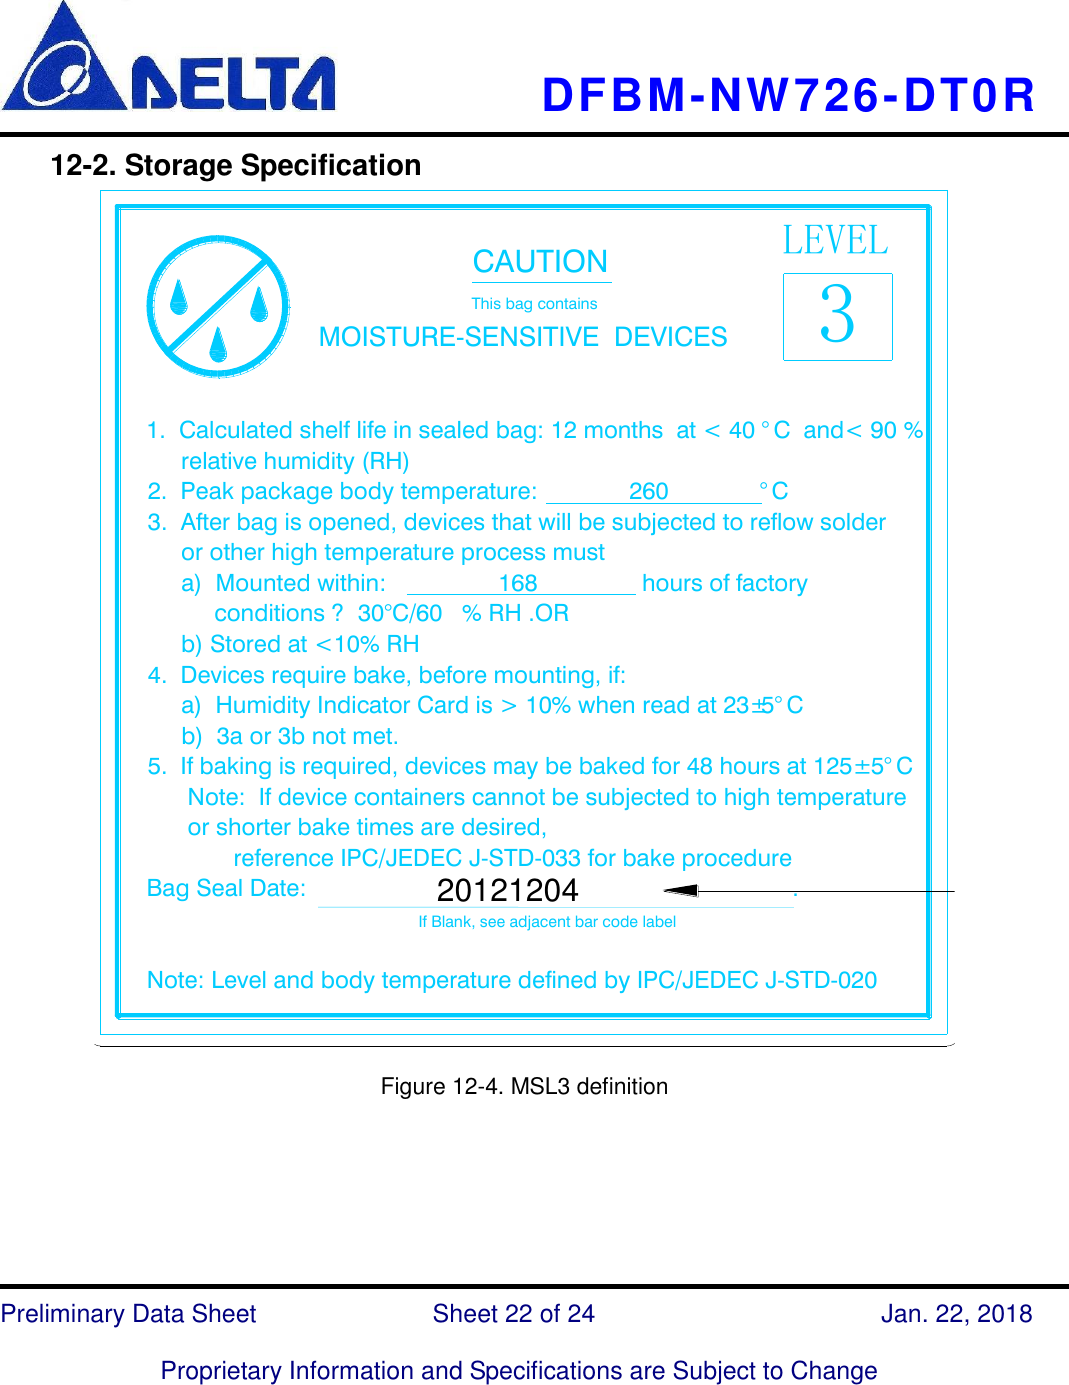     DFBM-NW726-DT0R   Preliminary Data Sheet               Sheet 22 of 24      Jan. 22, 2018  Proprietary Information and Specifications are Subject to Change  12-2. Storage Specification   LEVEL3                                      CAUTION                                      This bag contains                    MOISTURE-SENSITIVE  DEVICES1.  Calculated shelf life in sealed bag: 12 months  at &lt; 40 °C  and&lt; 90 %      relative humidity (RH)2.  Peak package body temperature:              260              °C3.  After bag is opened, devices that will be subjected to reflow solder     or other high temperature process must     a)  Mounted within:                 168                hours of factory           conditions ?  30°C/60 % RH .OR     b) Stored at &lt;10% RH4.  Devices require bake, before mounting, if:     a)  Humidity Indicator Card is &gt; 10% when read at 23±5°C     b)  3a or 3b not met.5.  If baking is required, devices may be baked for 48 hours at 125± 5°C      Note:  If device containers cannot be subjected to high temperature        or shorter bake times are desired,             reference IPC/JEDEC J-STD-033 for bake procedureBag Seal Date:                                                                          .                                                                                             If Blank, see adjacent bar code labelNote: Level and body temperature defined by IPC/JEDEC J-STD-02020121204 Note 7  Figure 12-4. MSL3 definition       